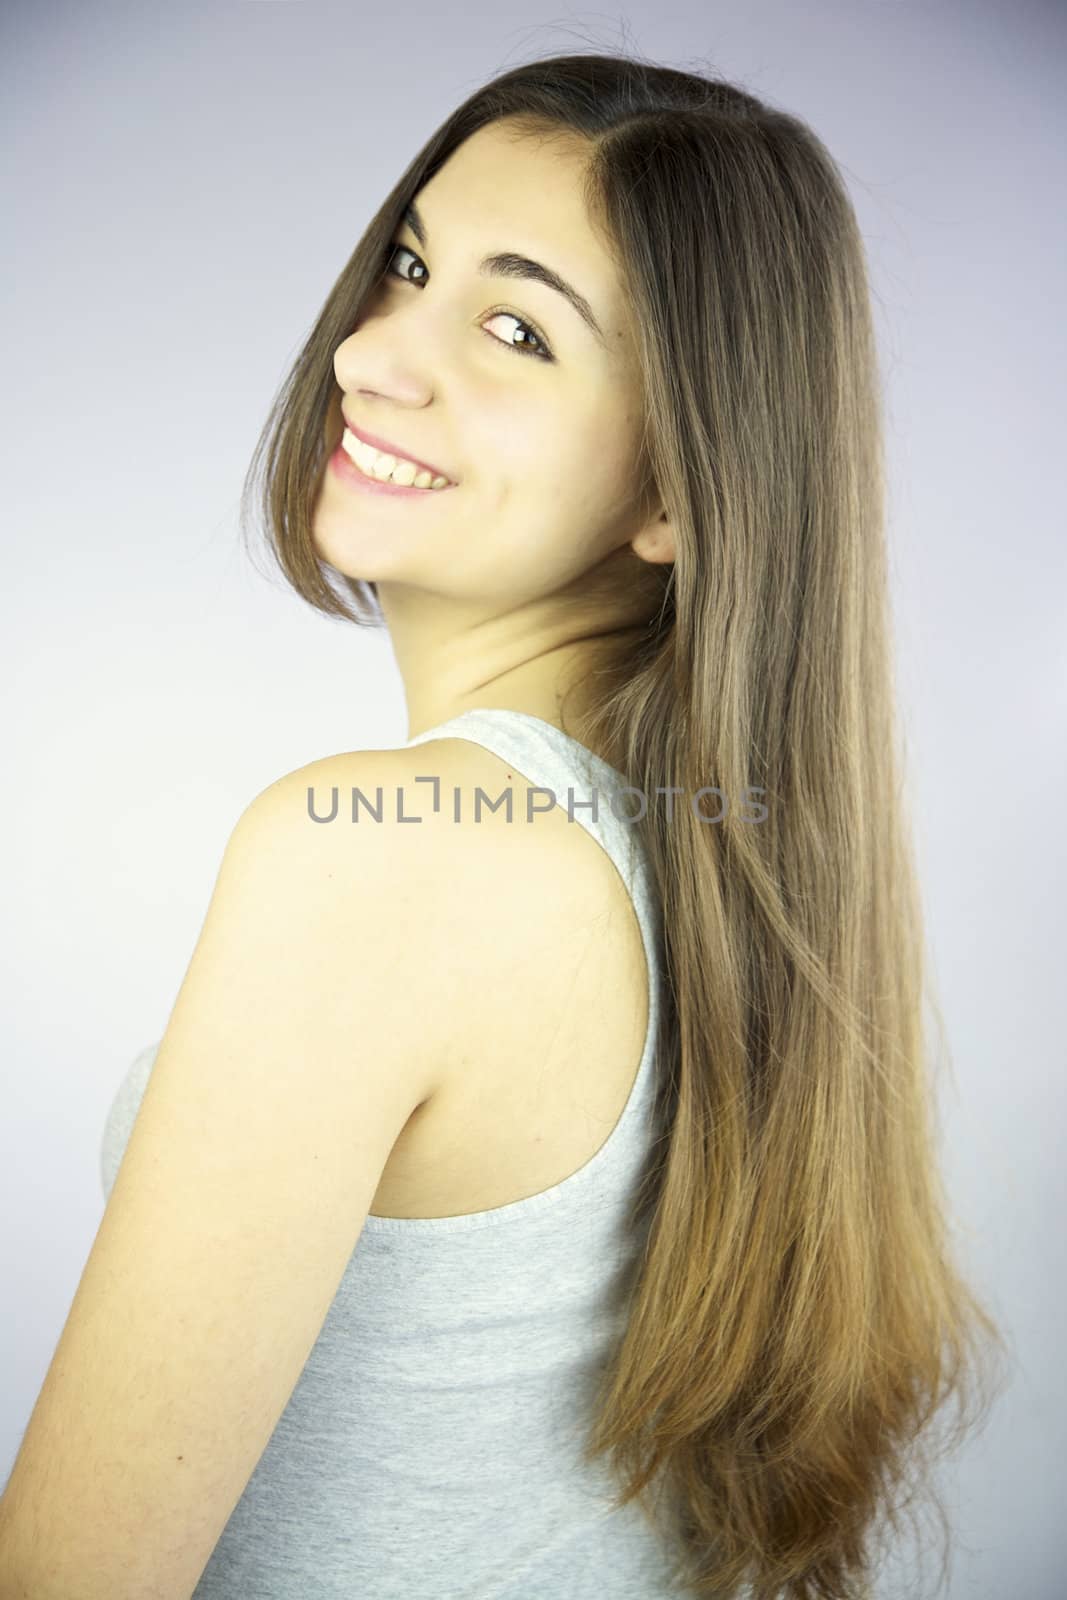 Brunette with long hair smiling very happy